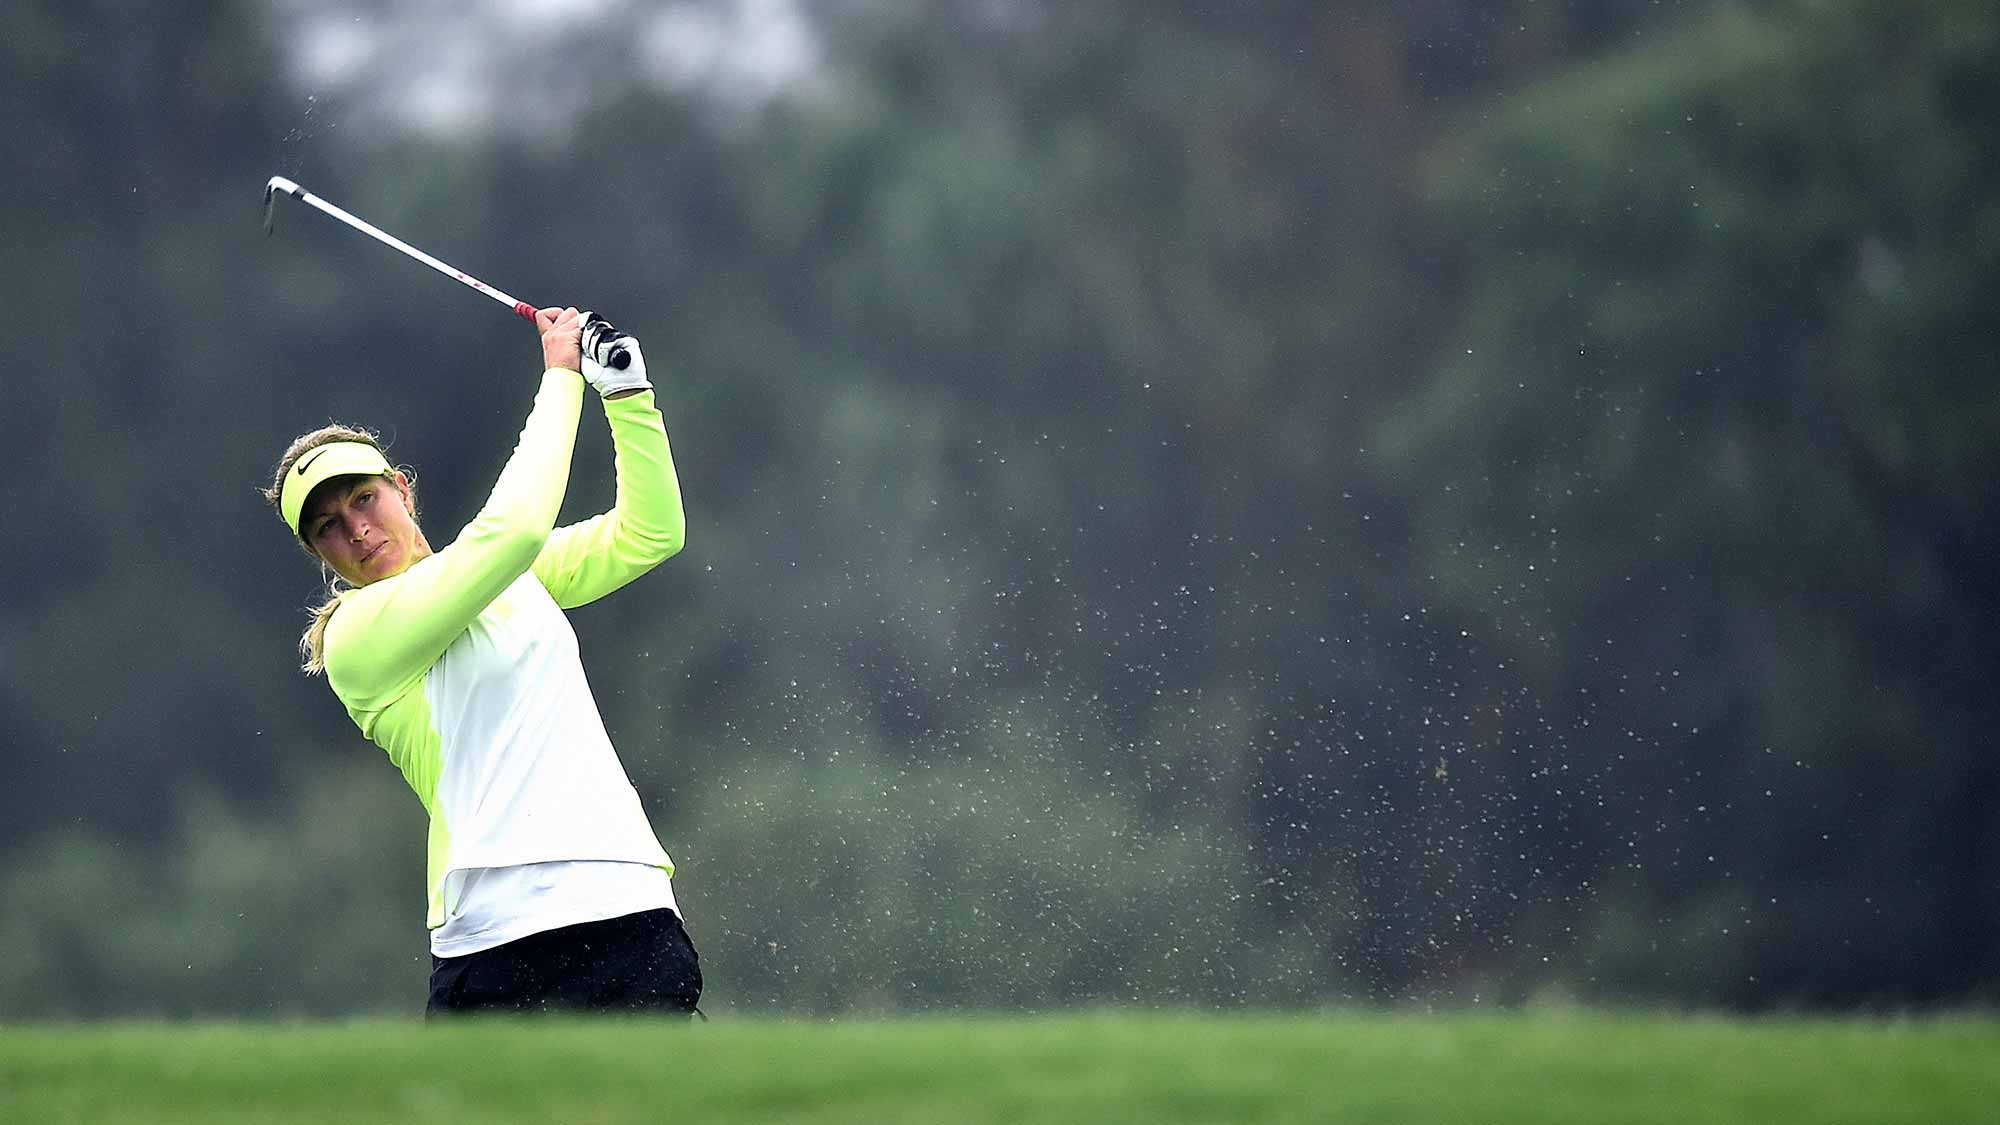 Suzann Pettersen of Norway plays a shot during day two of 2015 Fubon LPGA Taiwan Championship at Miramar Golf Country Club